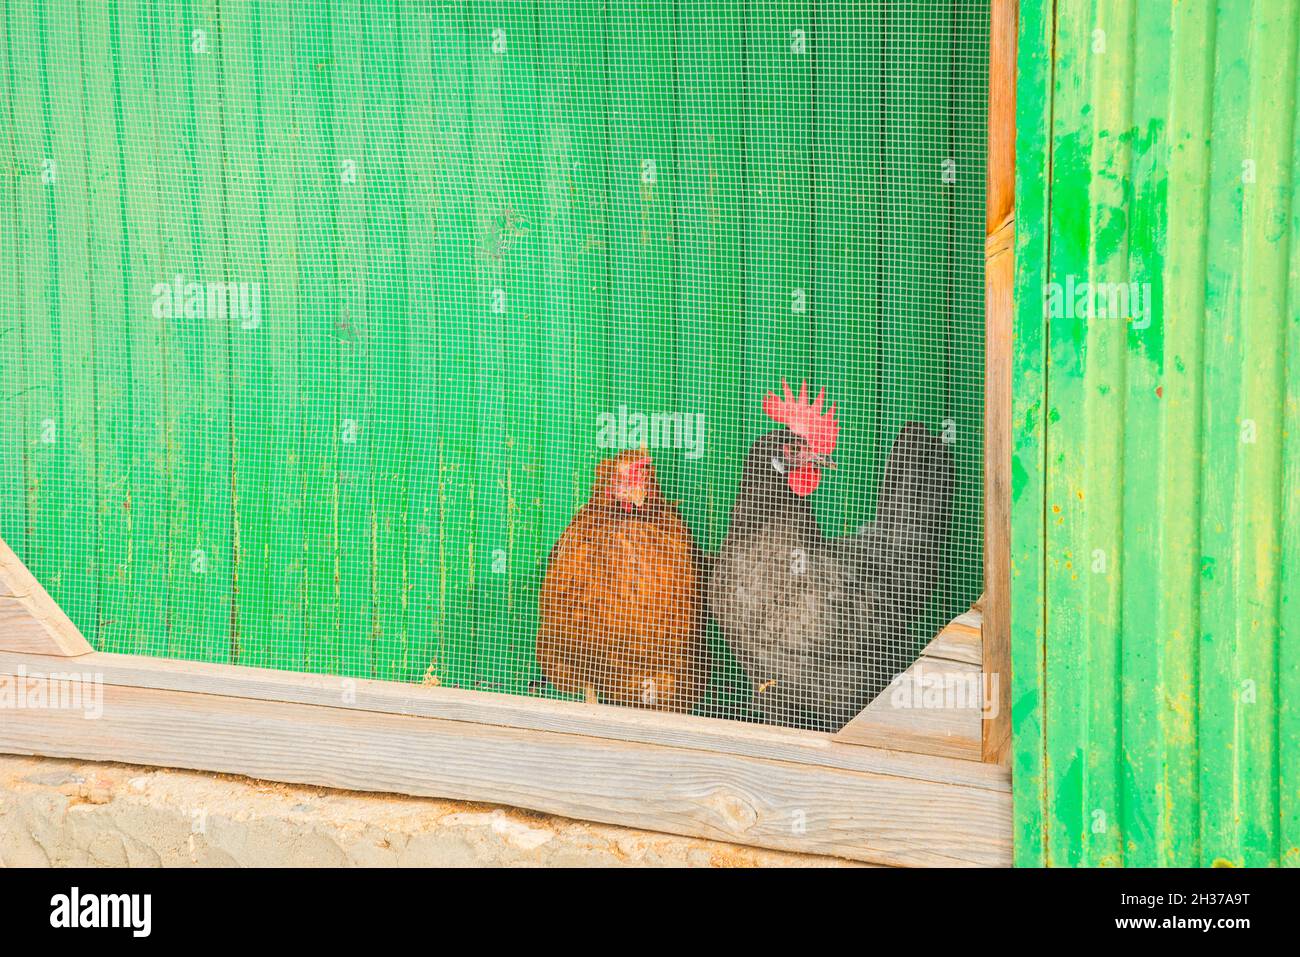 Hens behind a wire netting in the henhouse. Stock Photo